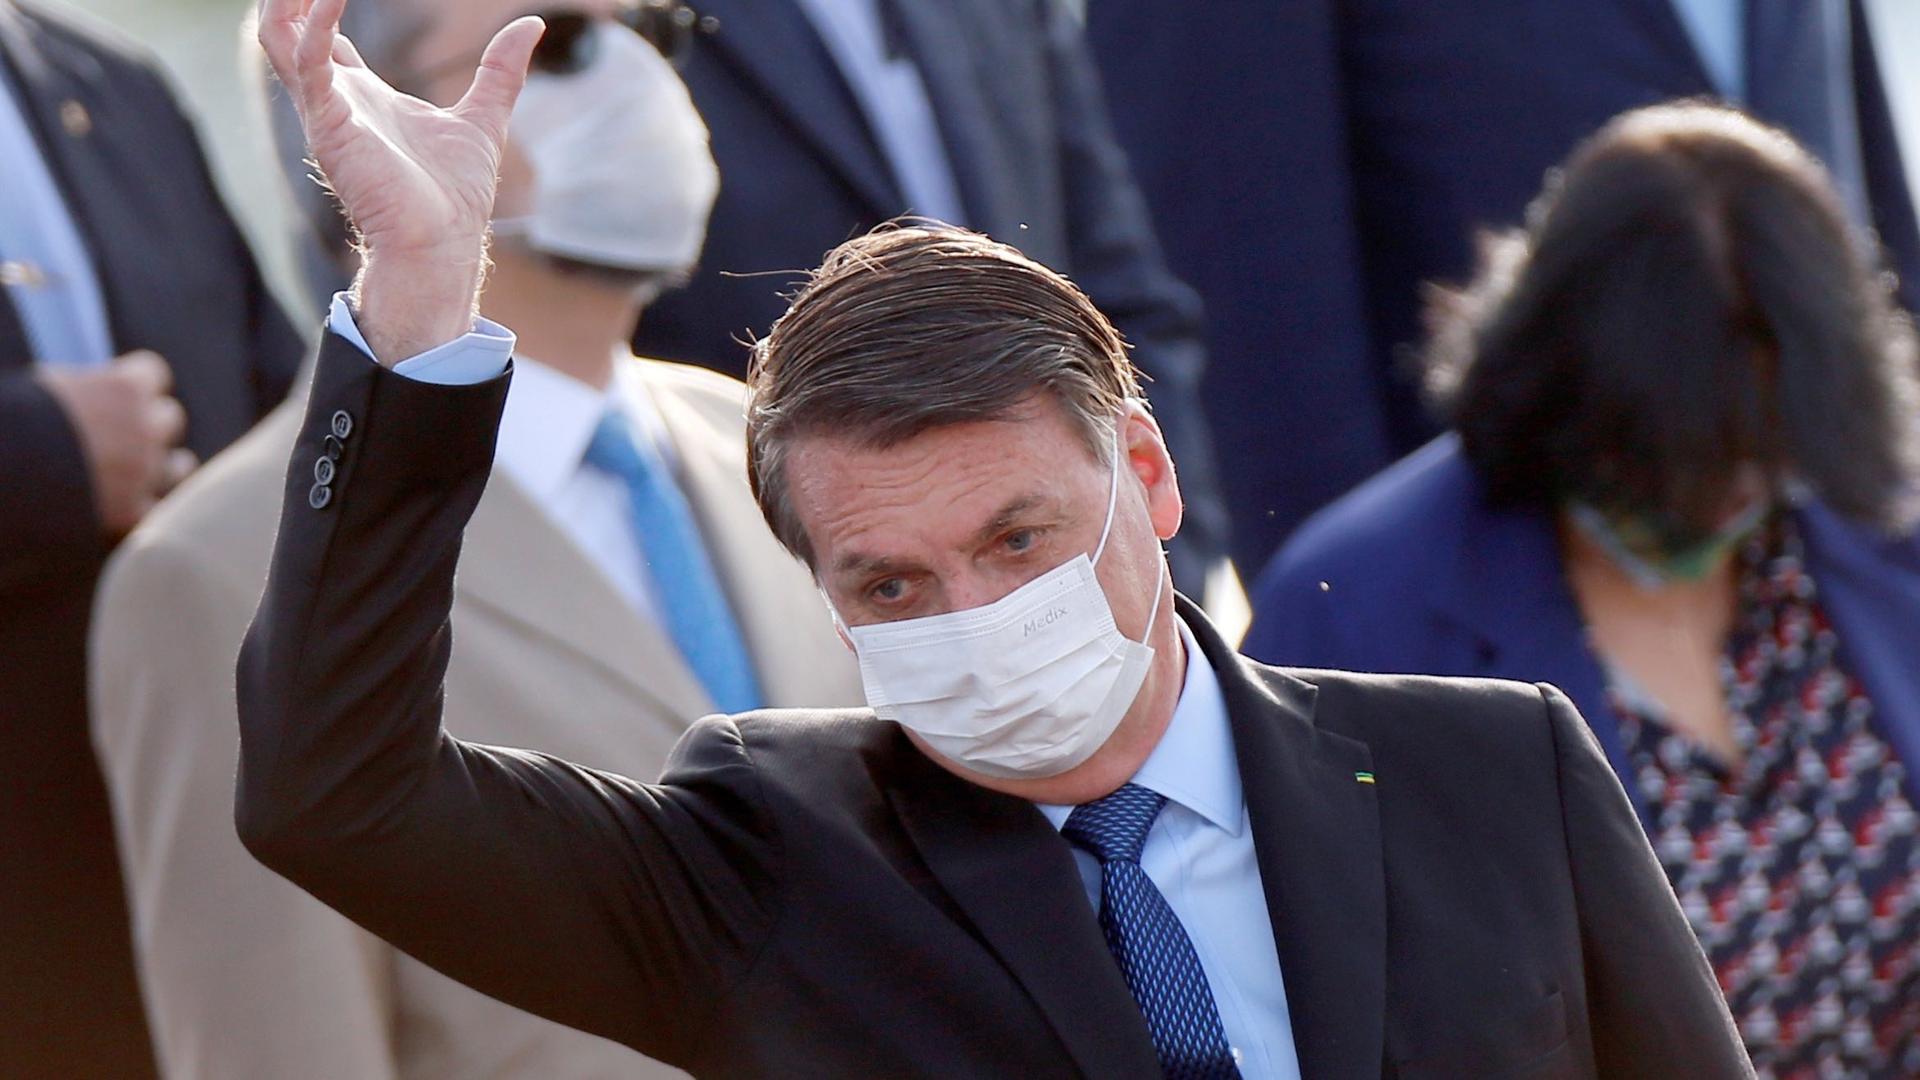 Brazil's President Jair Bolsonaro wearing a protective face mask gestures during a national flag hoisting ceremony in front of Alvorada Palace, amid the coronavirus disease (COVID-19) outbreak in Brasilia, Brazil, June 9, 2020.